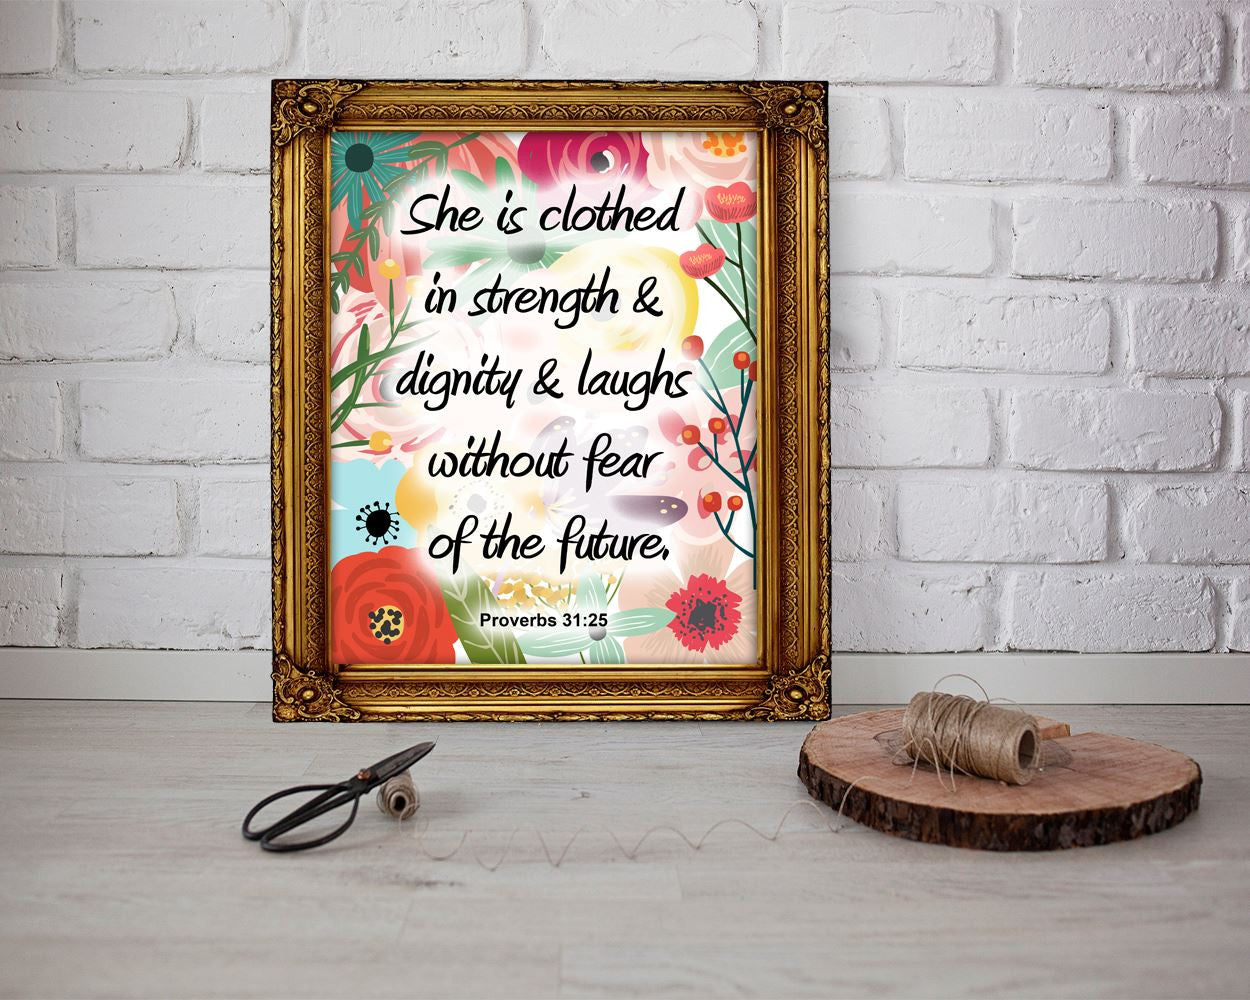 Verse Prints Wall Art Proverbs Digital Download Verse Faithful Art Proverbs Faithful Print Verse Instant Download Proverbs Frame And Canvas - Digital Download